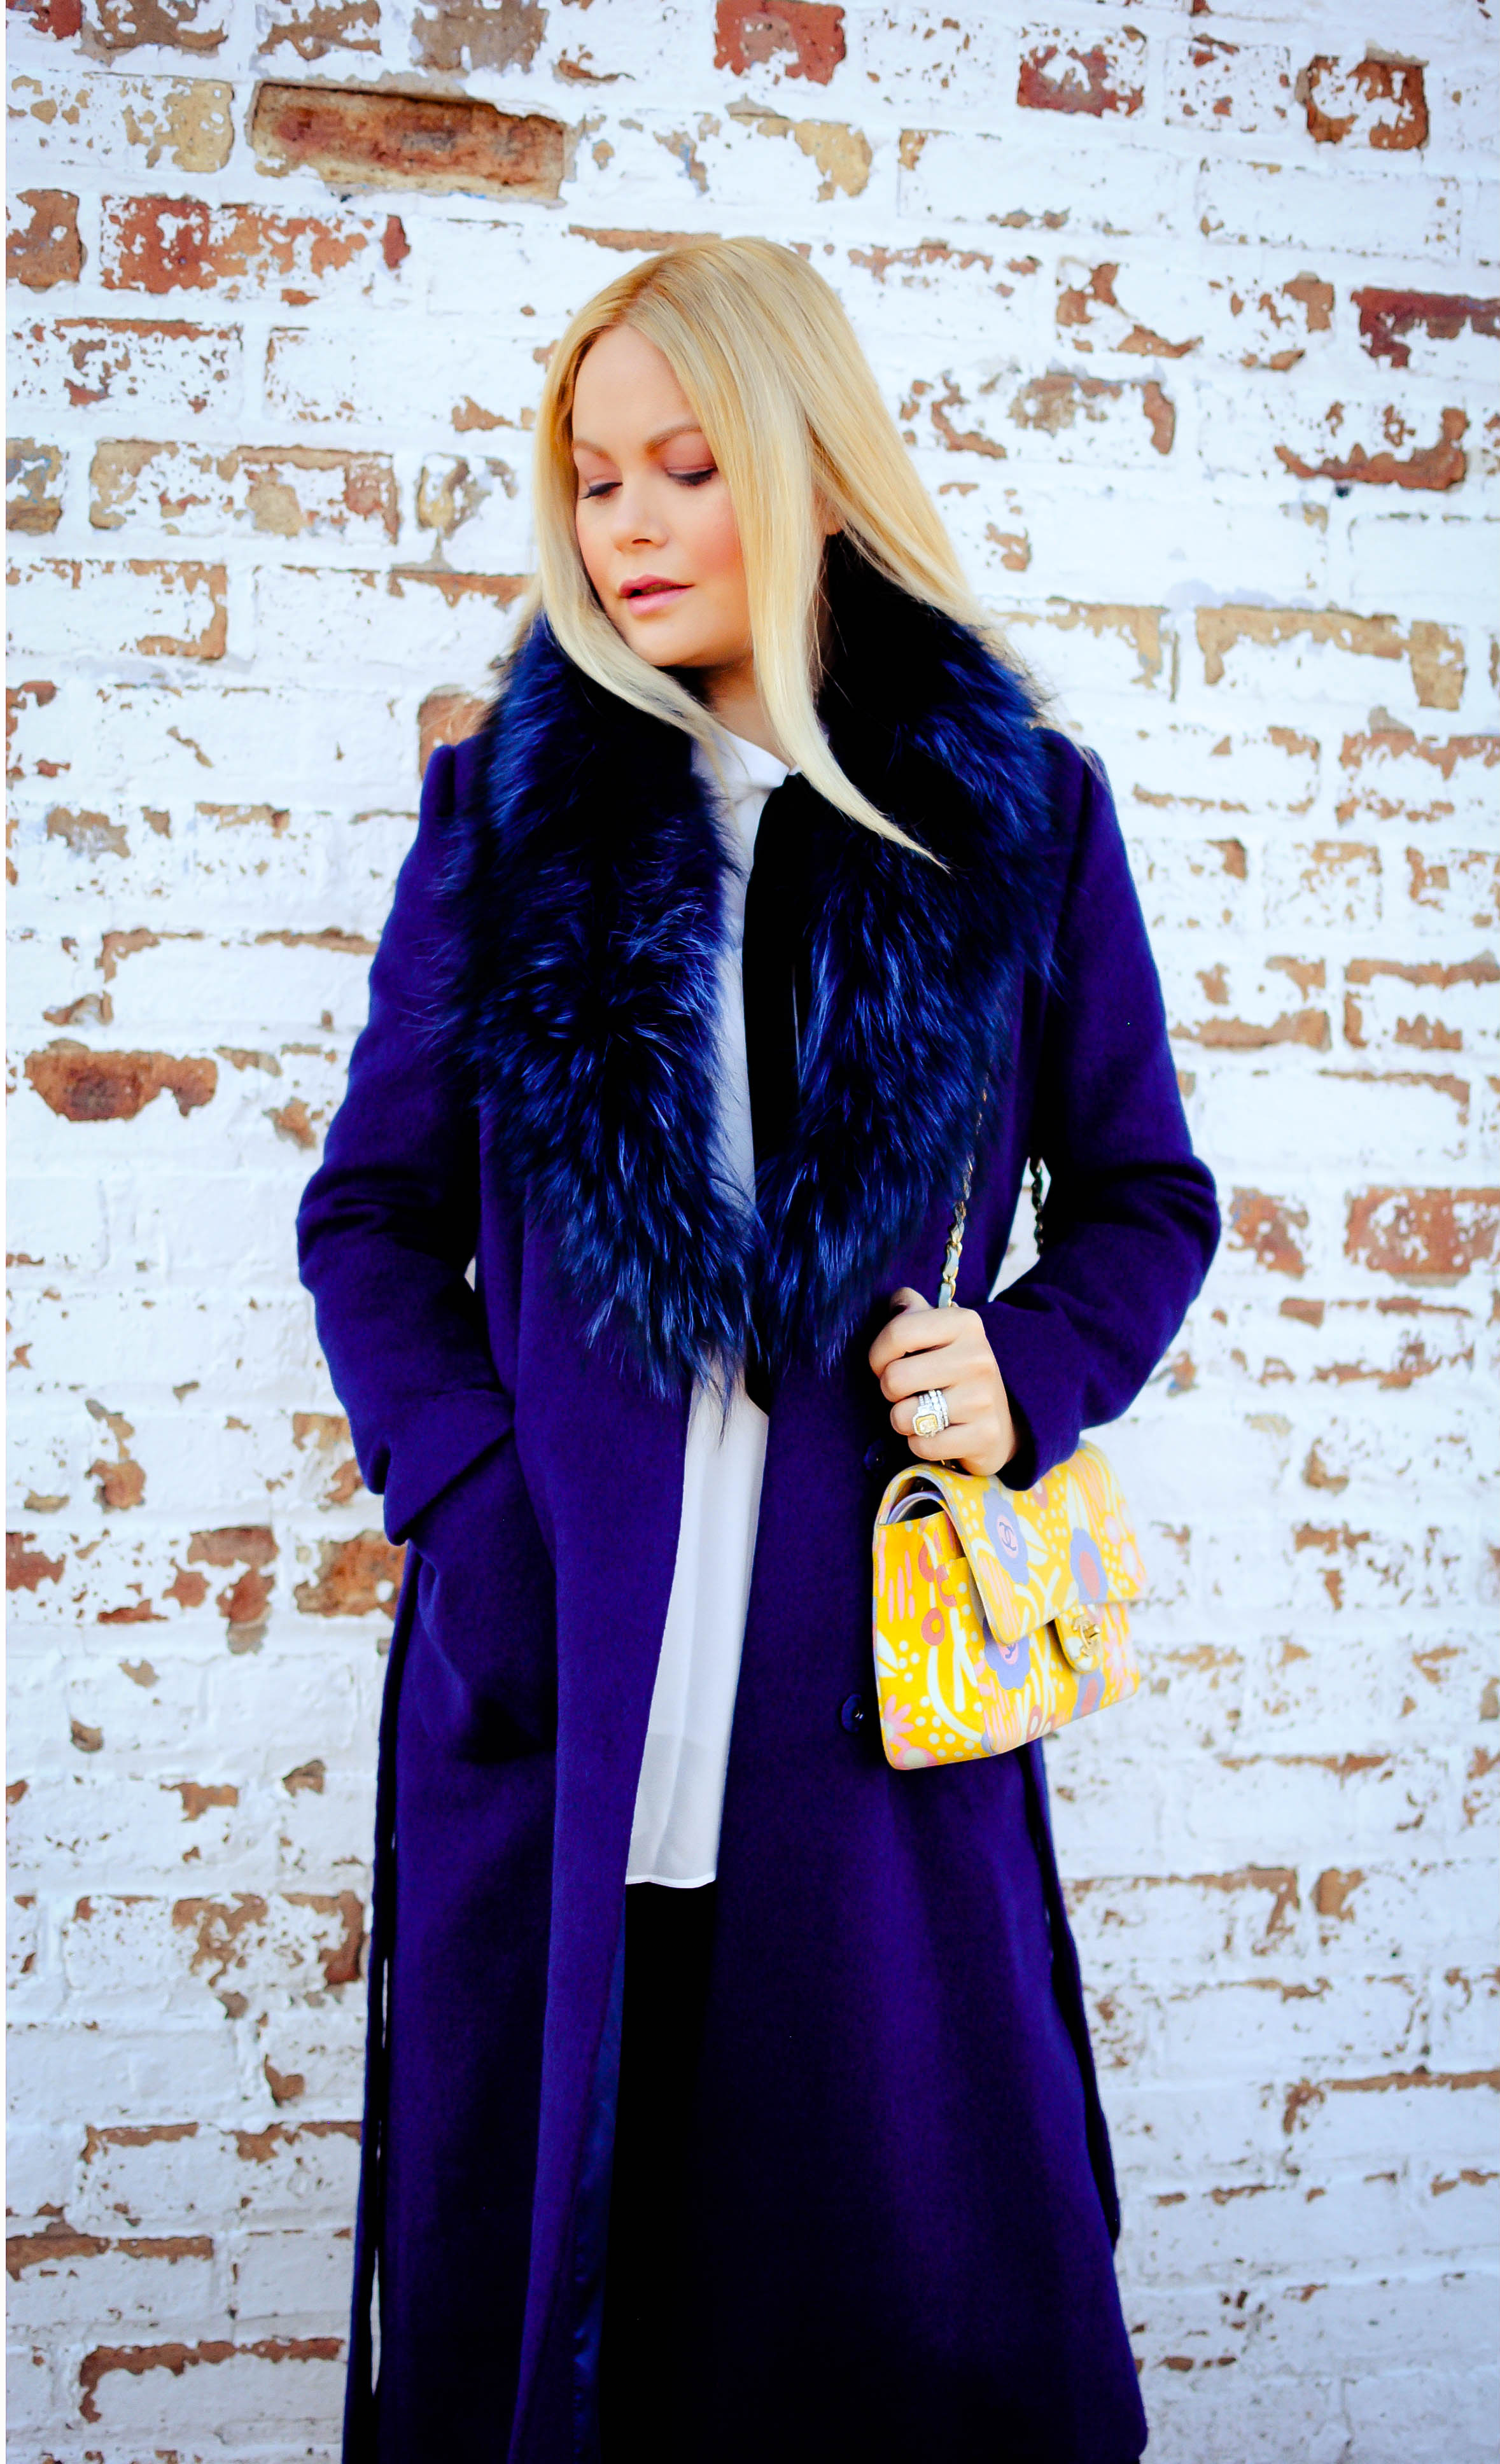 vanessa-lambert-blogger-behind-what-would-v-wear-wears-a-osafei-deep-blue-wool-coat-from-dezzal-paired-with-a-vintage-chanel-purse_9